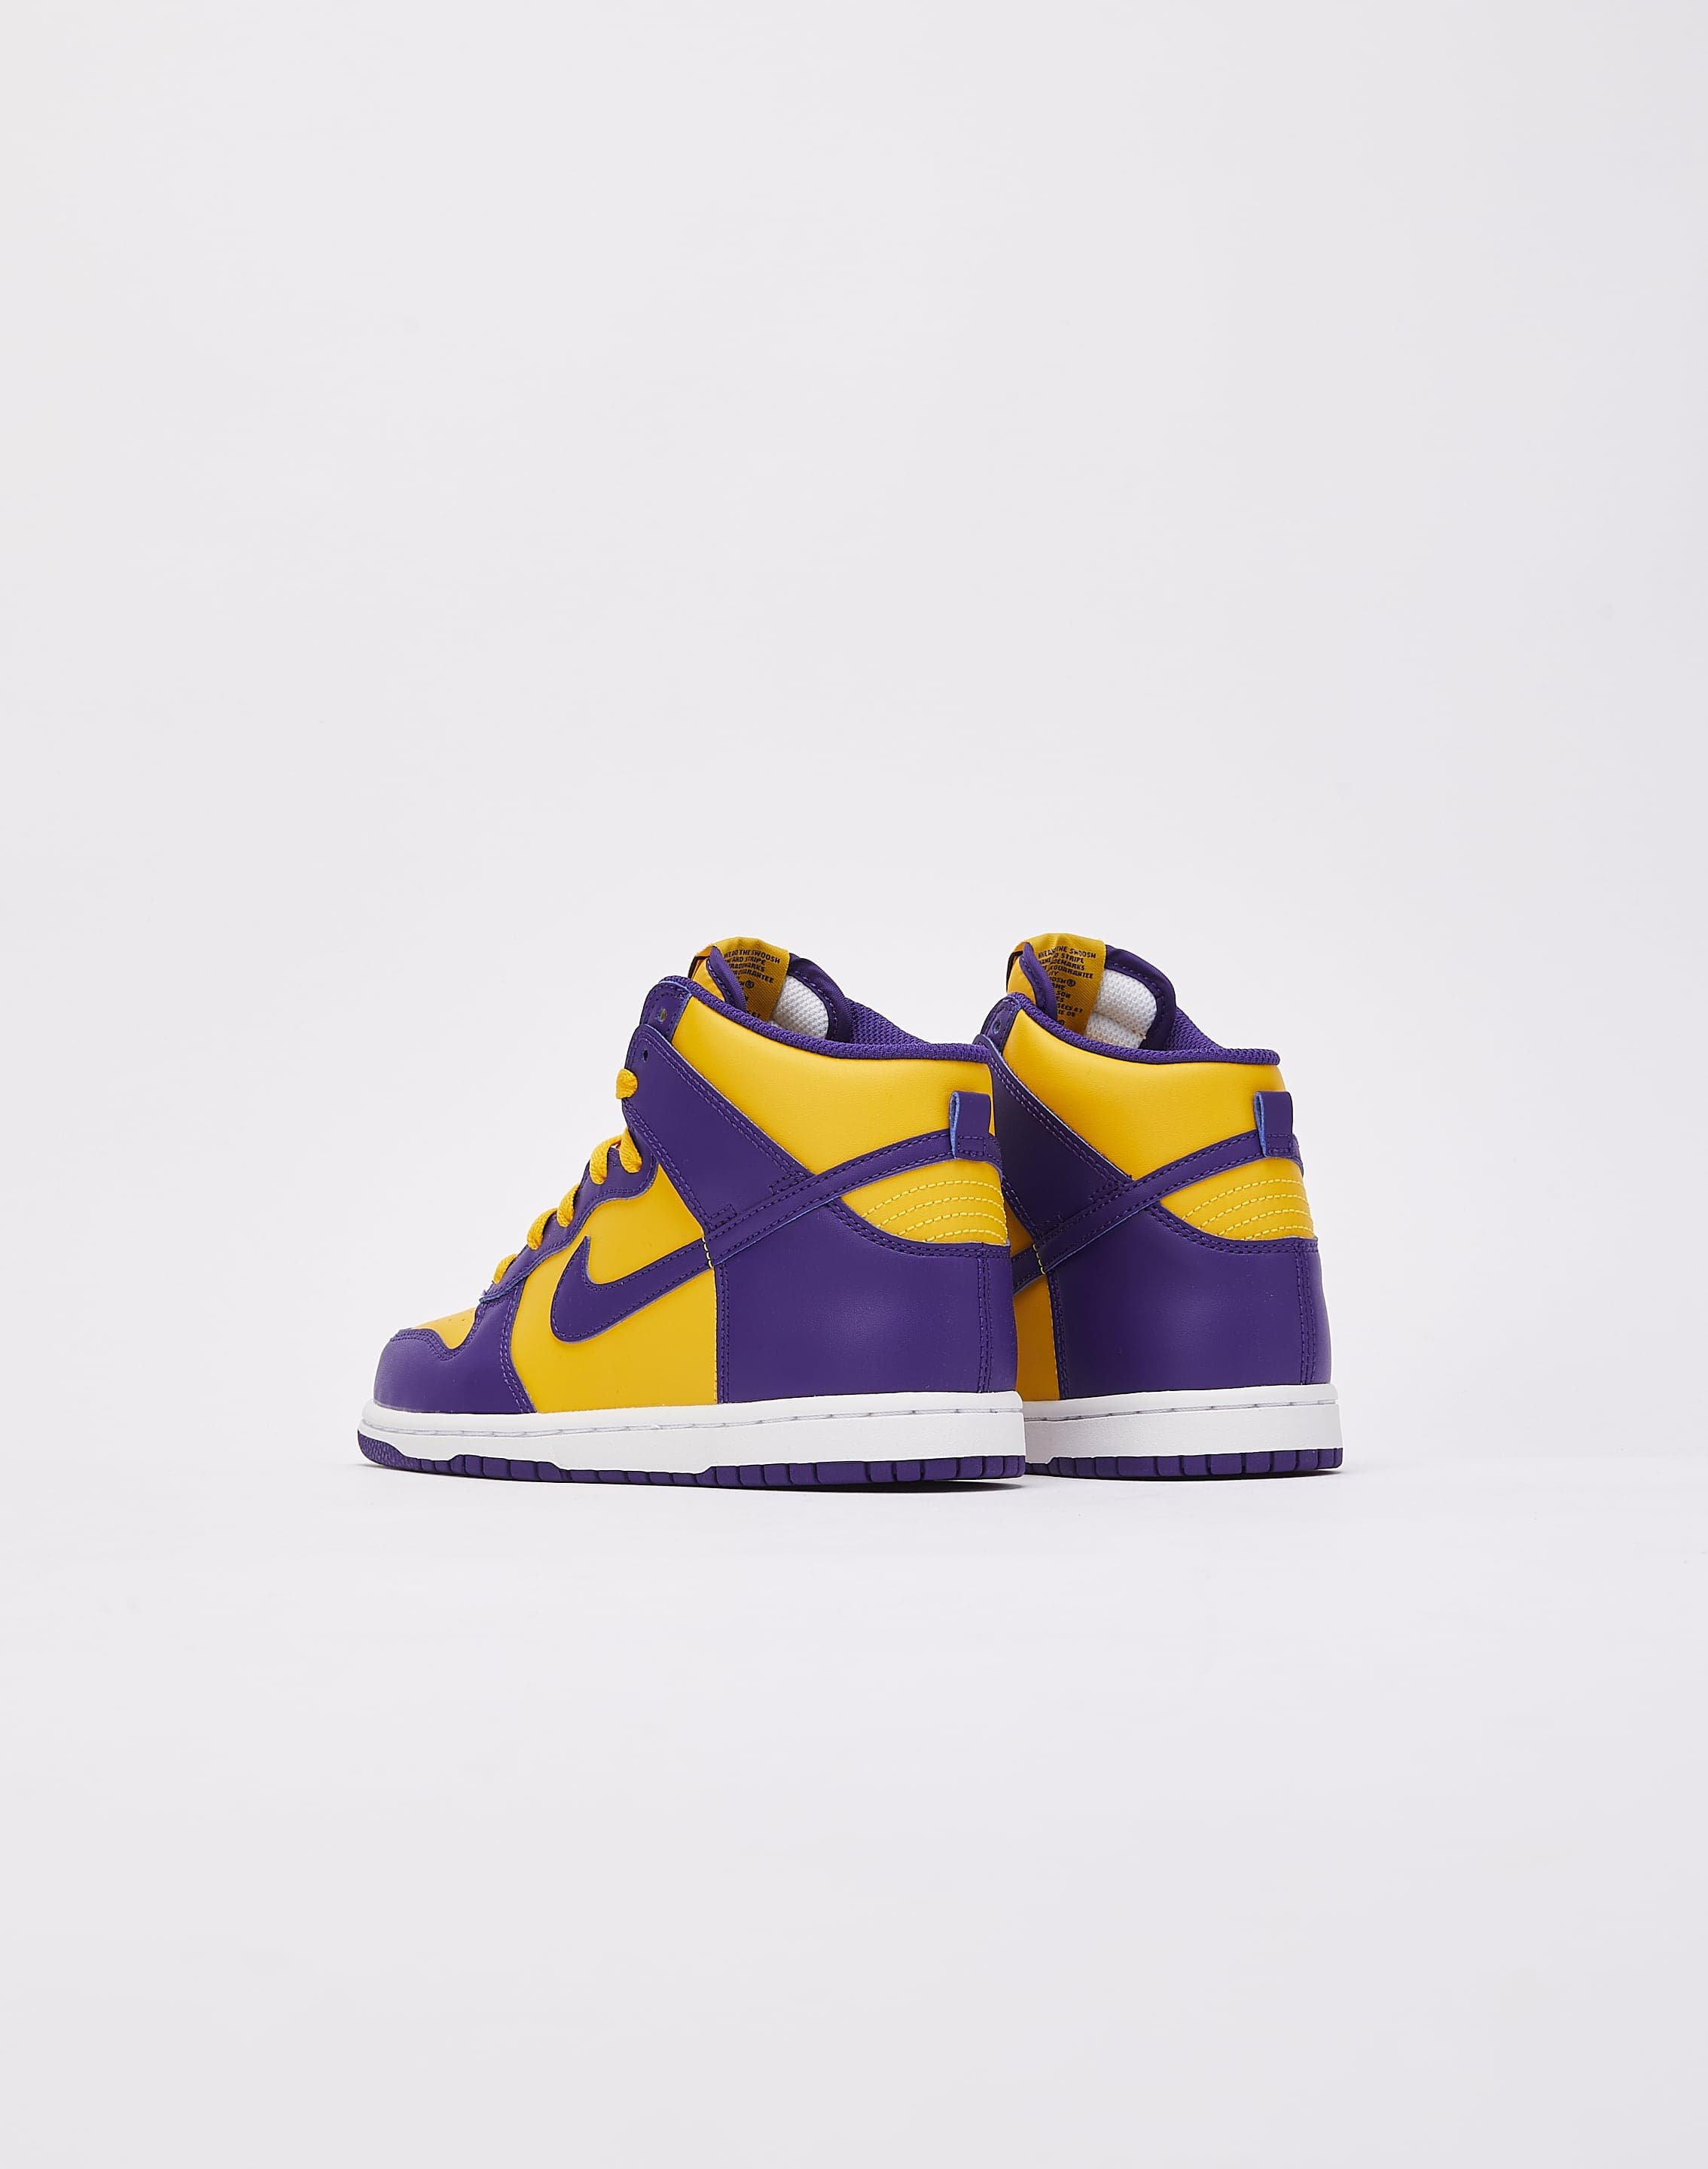 HOW TO STYLE NIKE DUNK LAKERS 